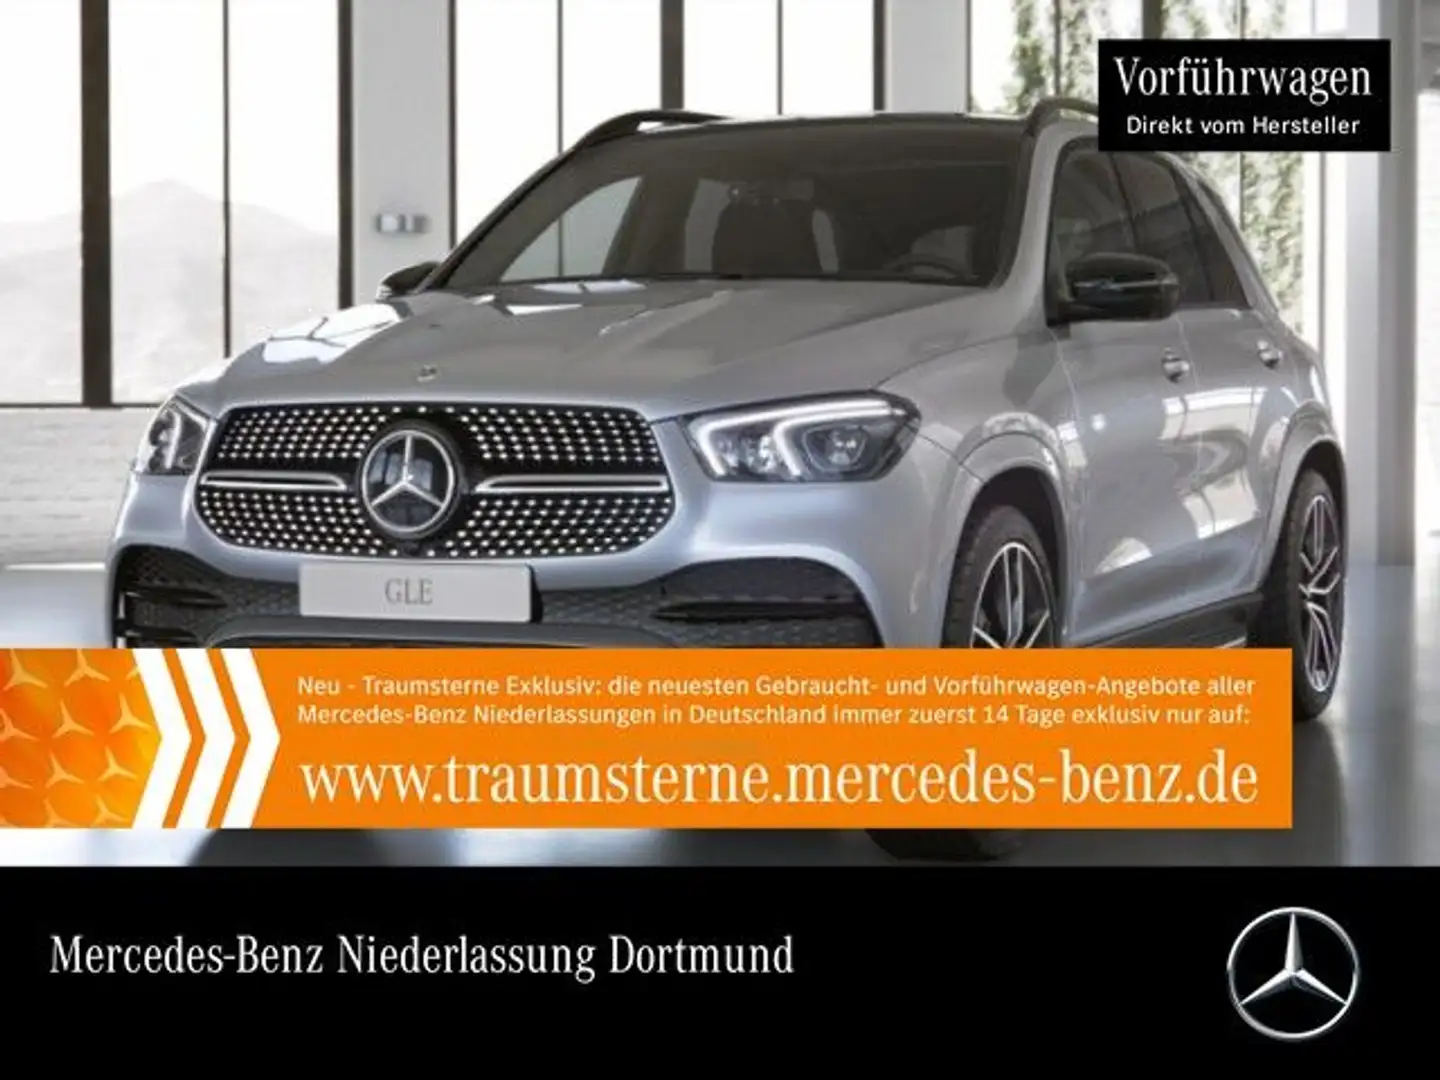 Mercedes-Benz GLE 580 4M AMG+EXCLUSIVE+NIGHT+PANO+360+LED+22"+9G Argent - 1